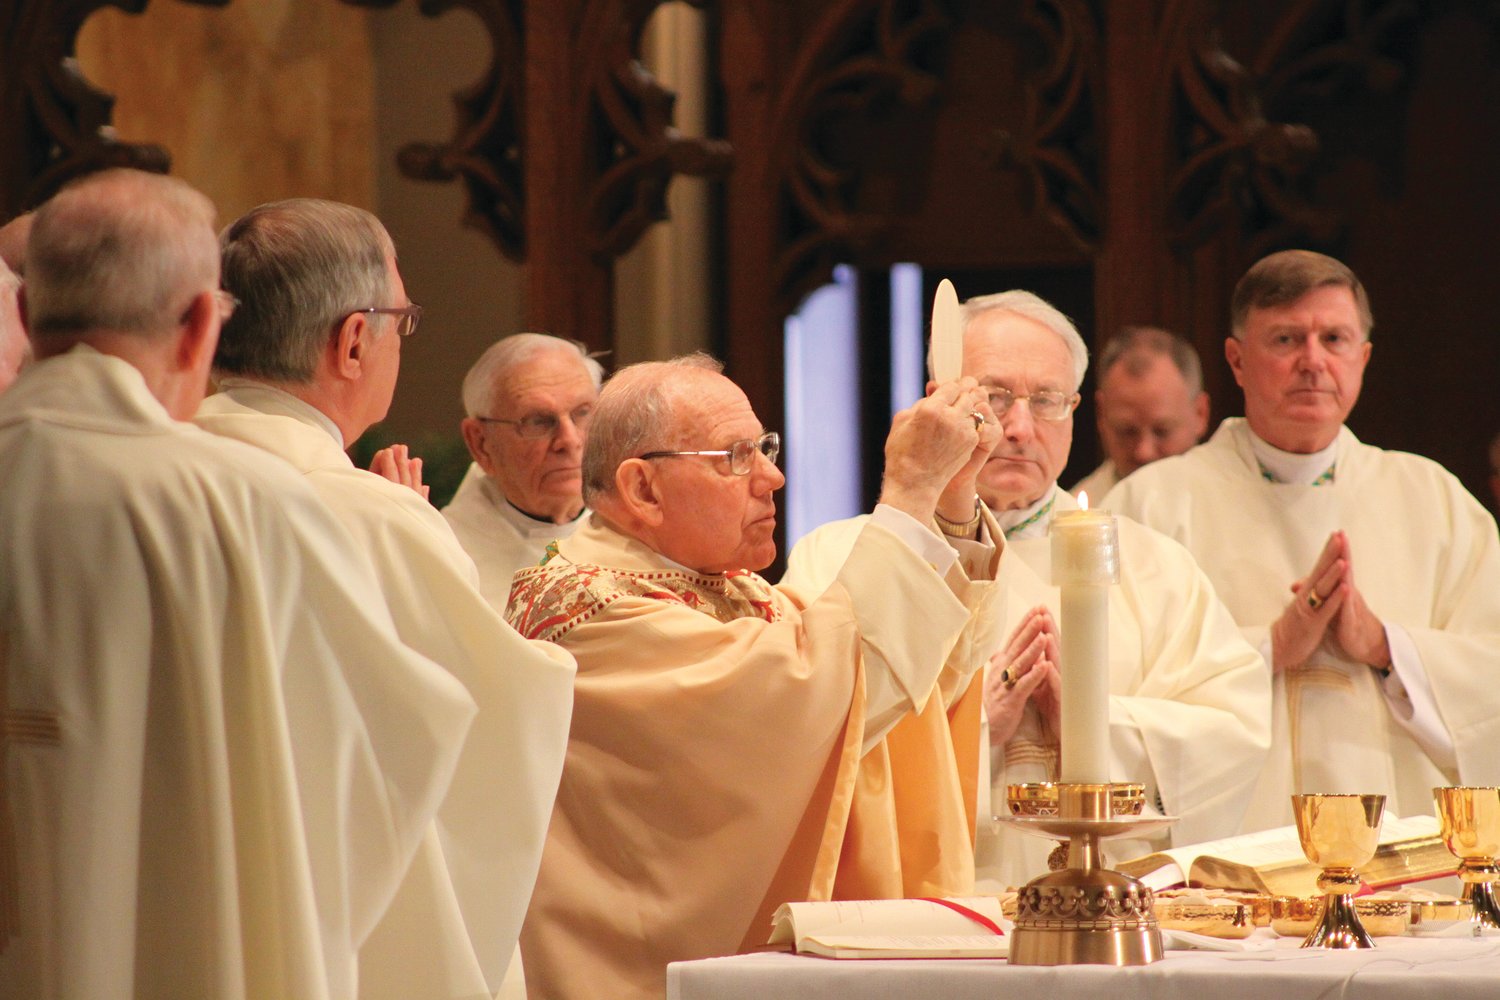 On Feb. 5, 2012, a Mass of Thanksgiving marked the 40th anniversary of Bishop Gelineau’s ordination and installation as a bishop.